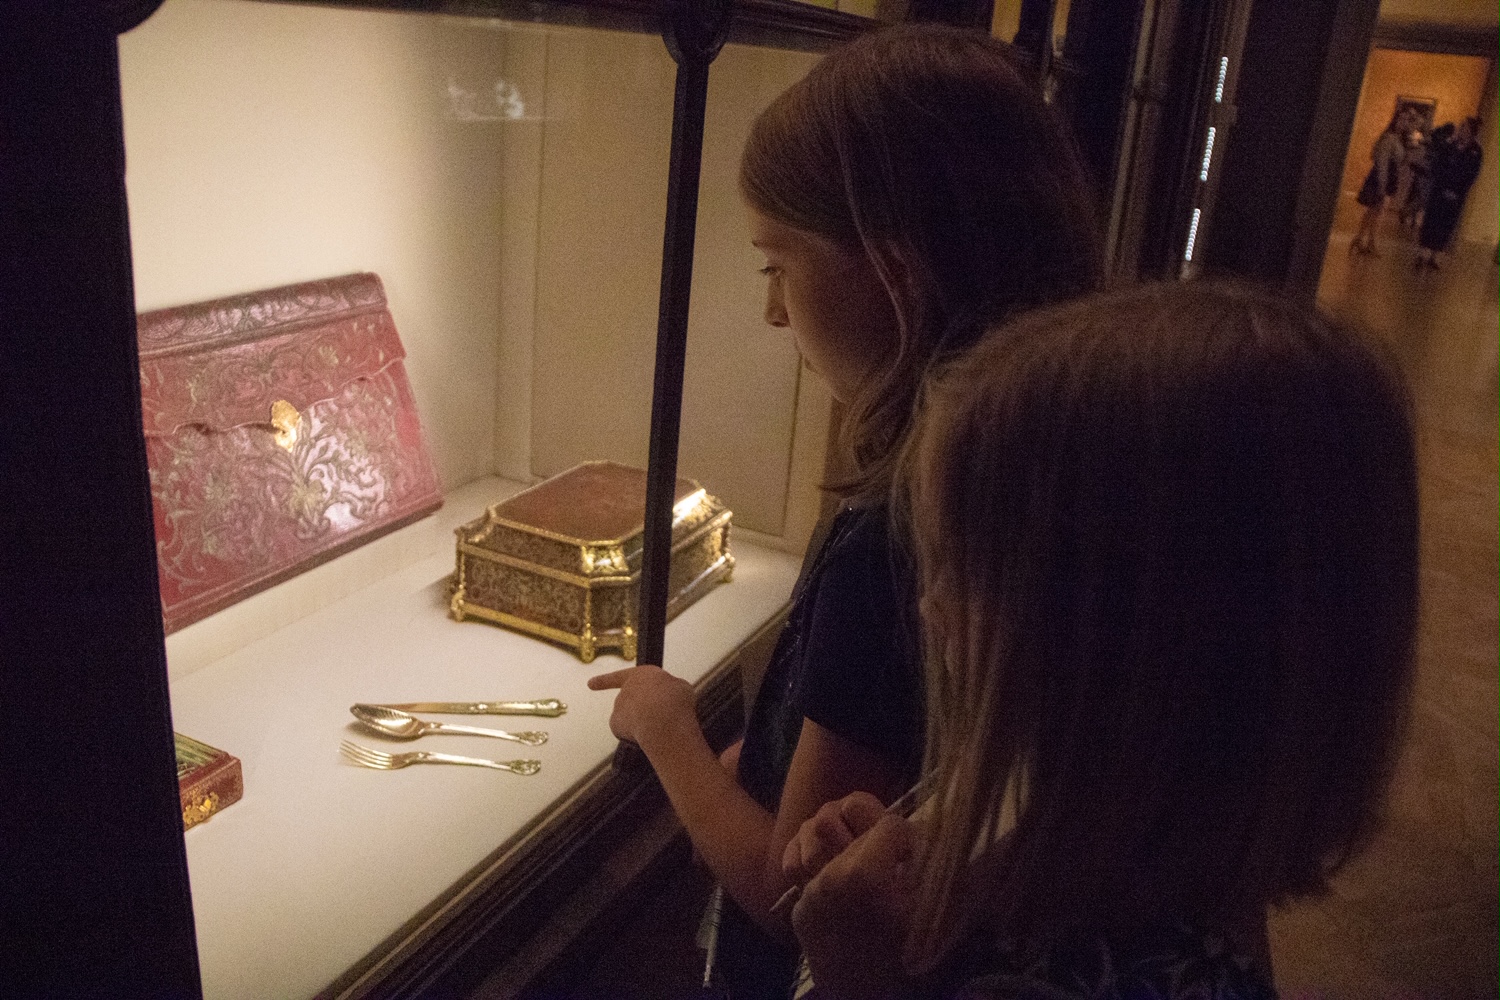 The Met “Harry Potter”-inspired tour “Griffins, Goblets and Gold” by fable & lark; Photo credit Janette Pellegrini